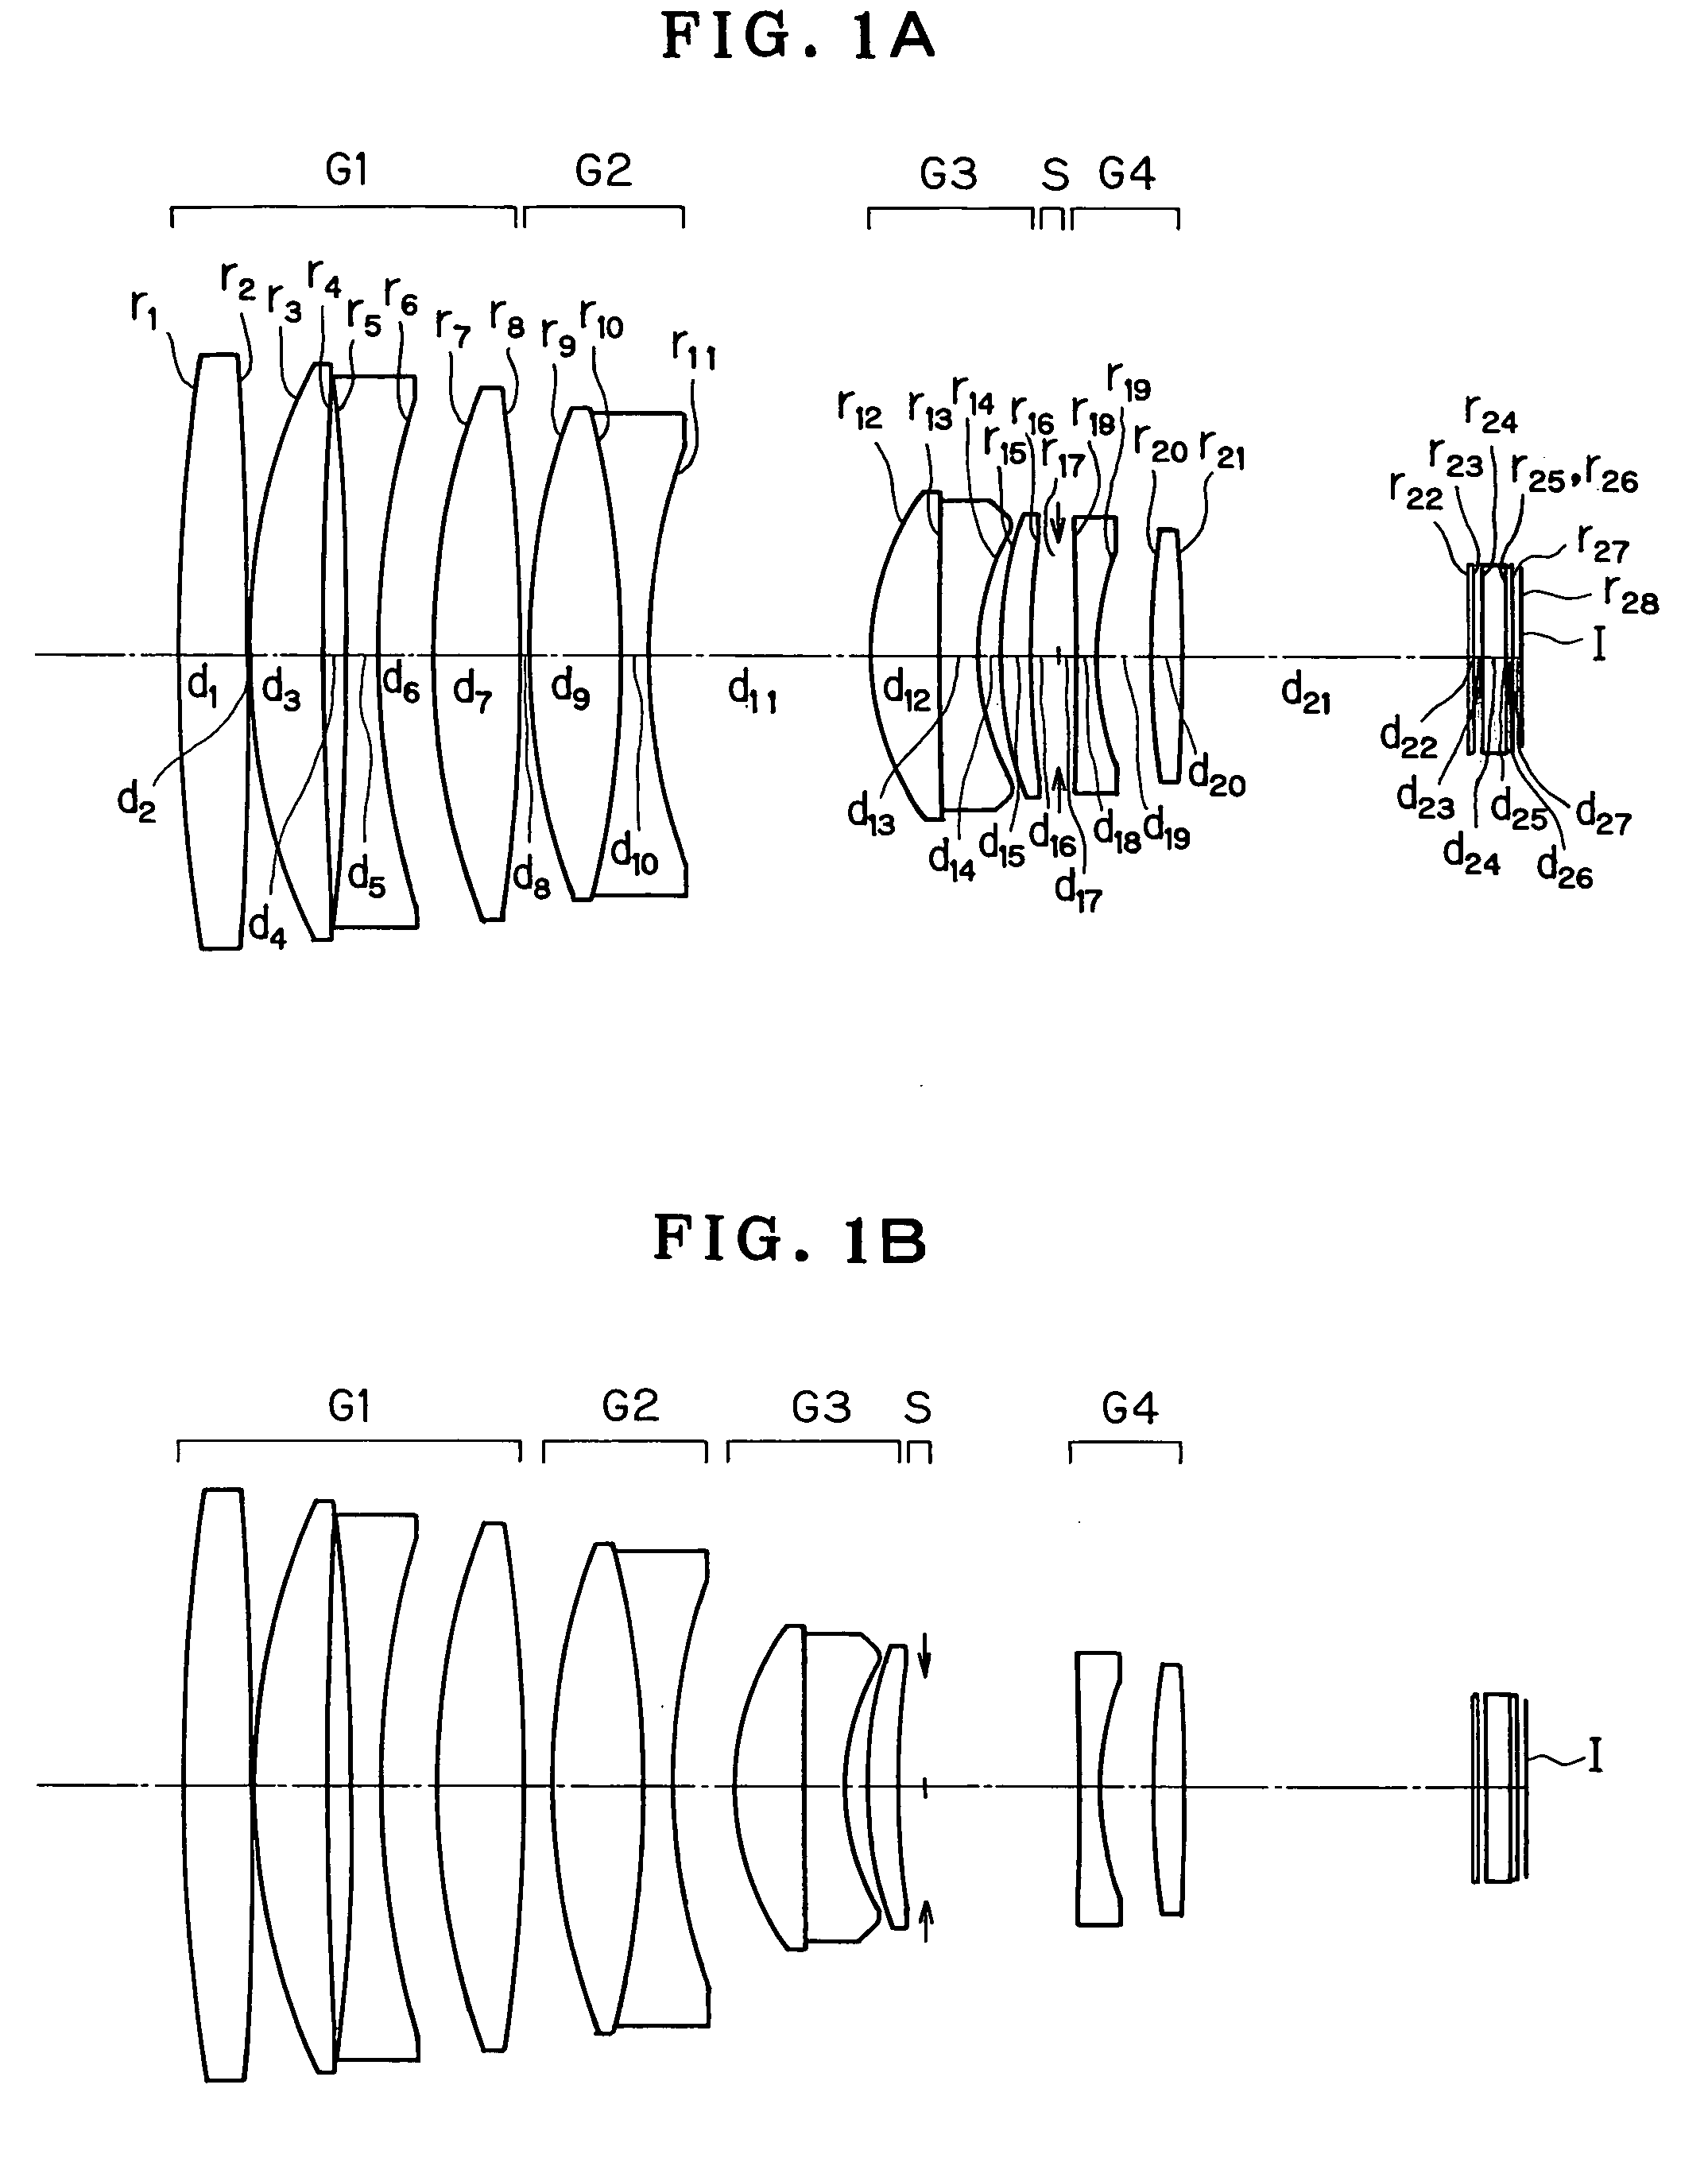 Telephoto lens, telephoto lens system, and imaging system incorporating the same